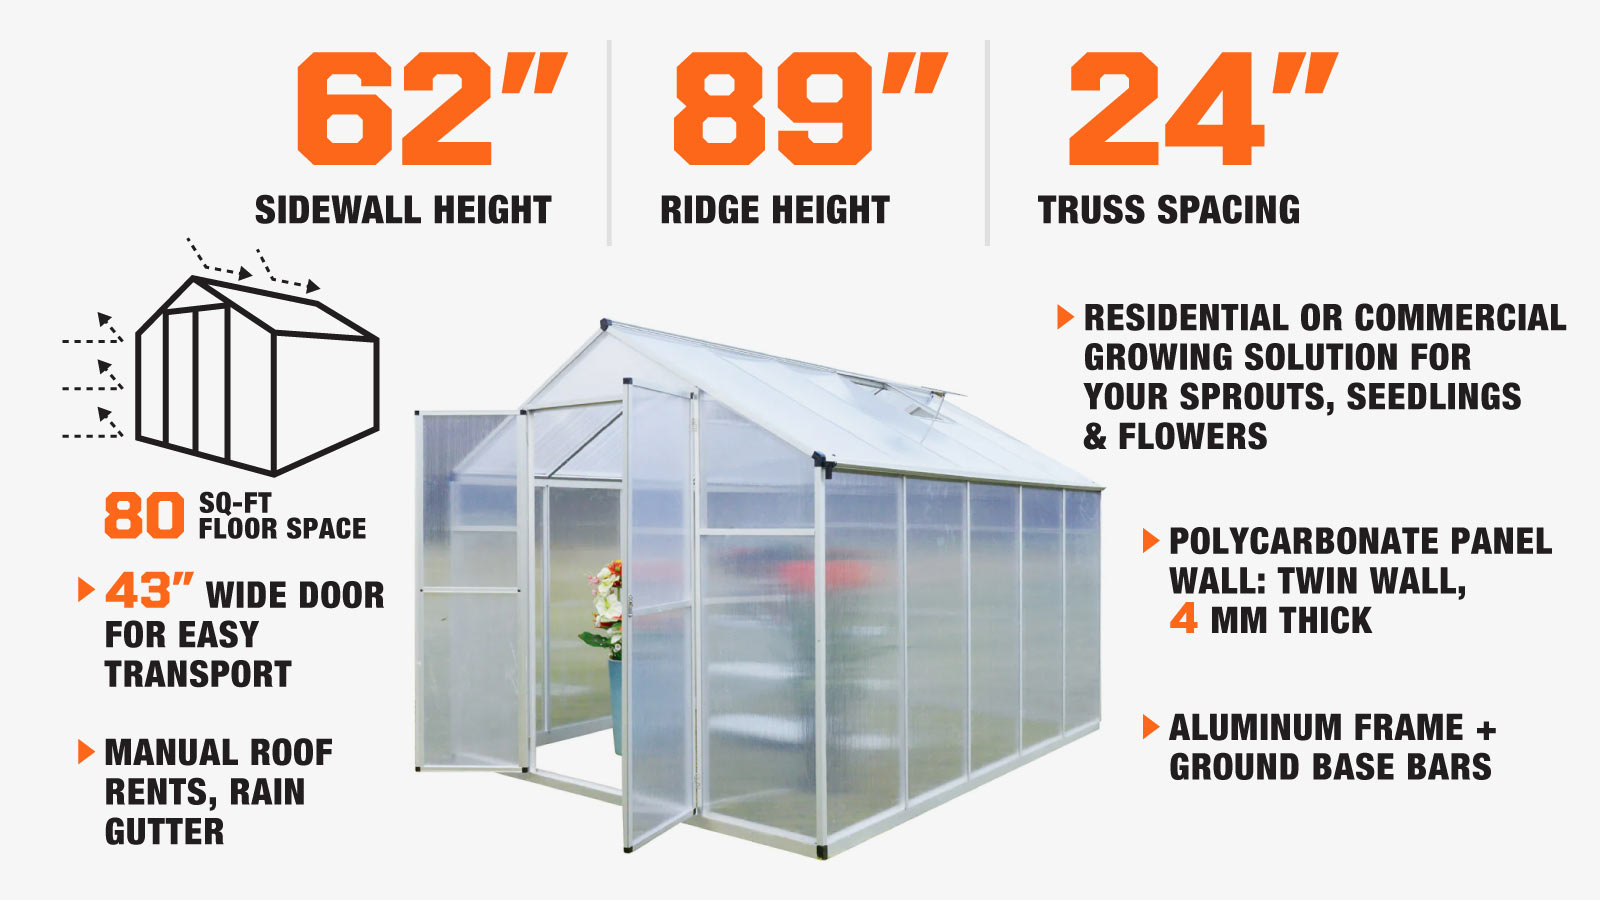 TMG Industrial 8' x 10' Aluminum Frame Greenhouse w/4 mm Twin Wall Polycarbonate Panels, UV Protected Panels, TMG-GH810-description-image